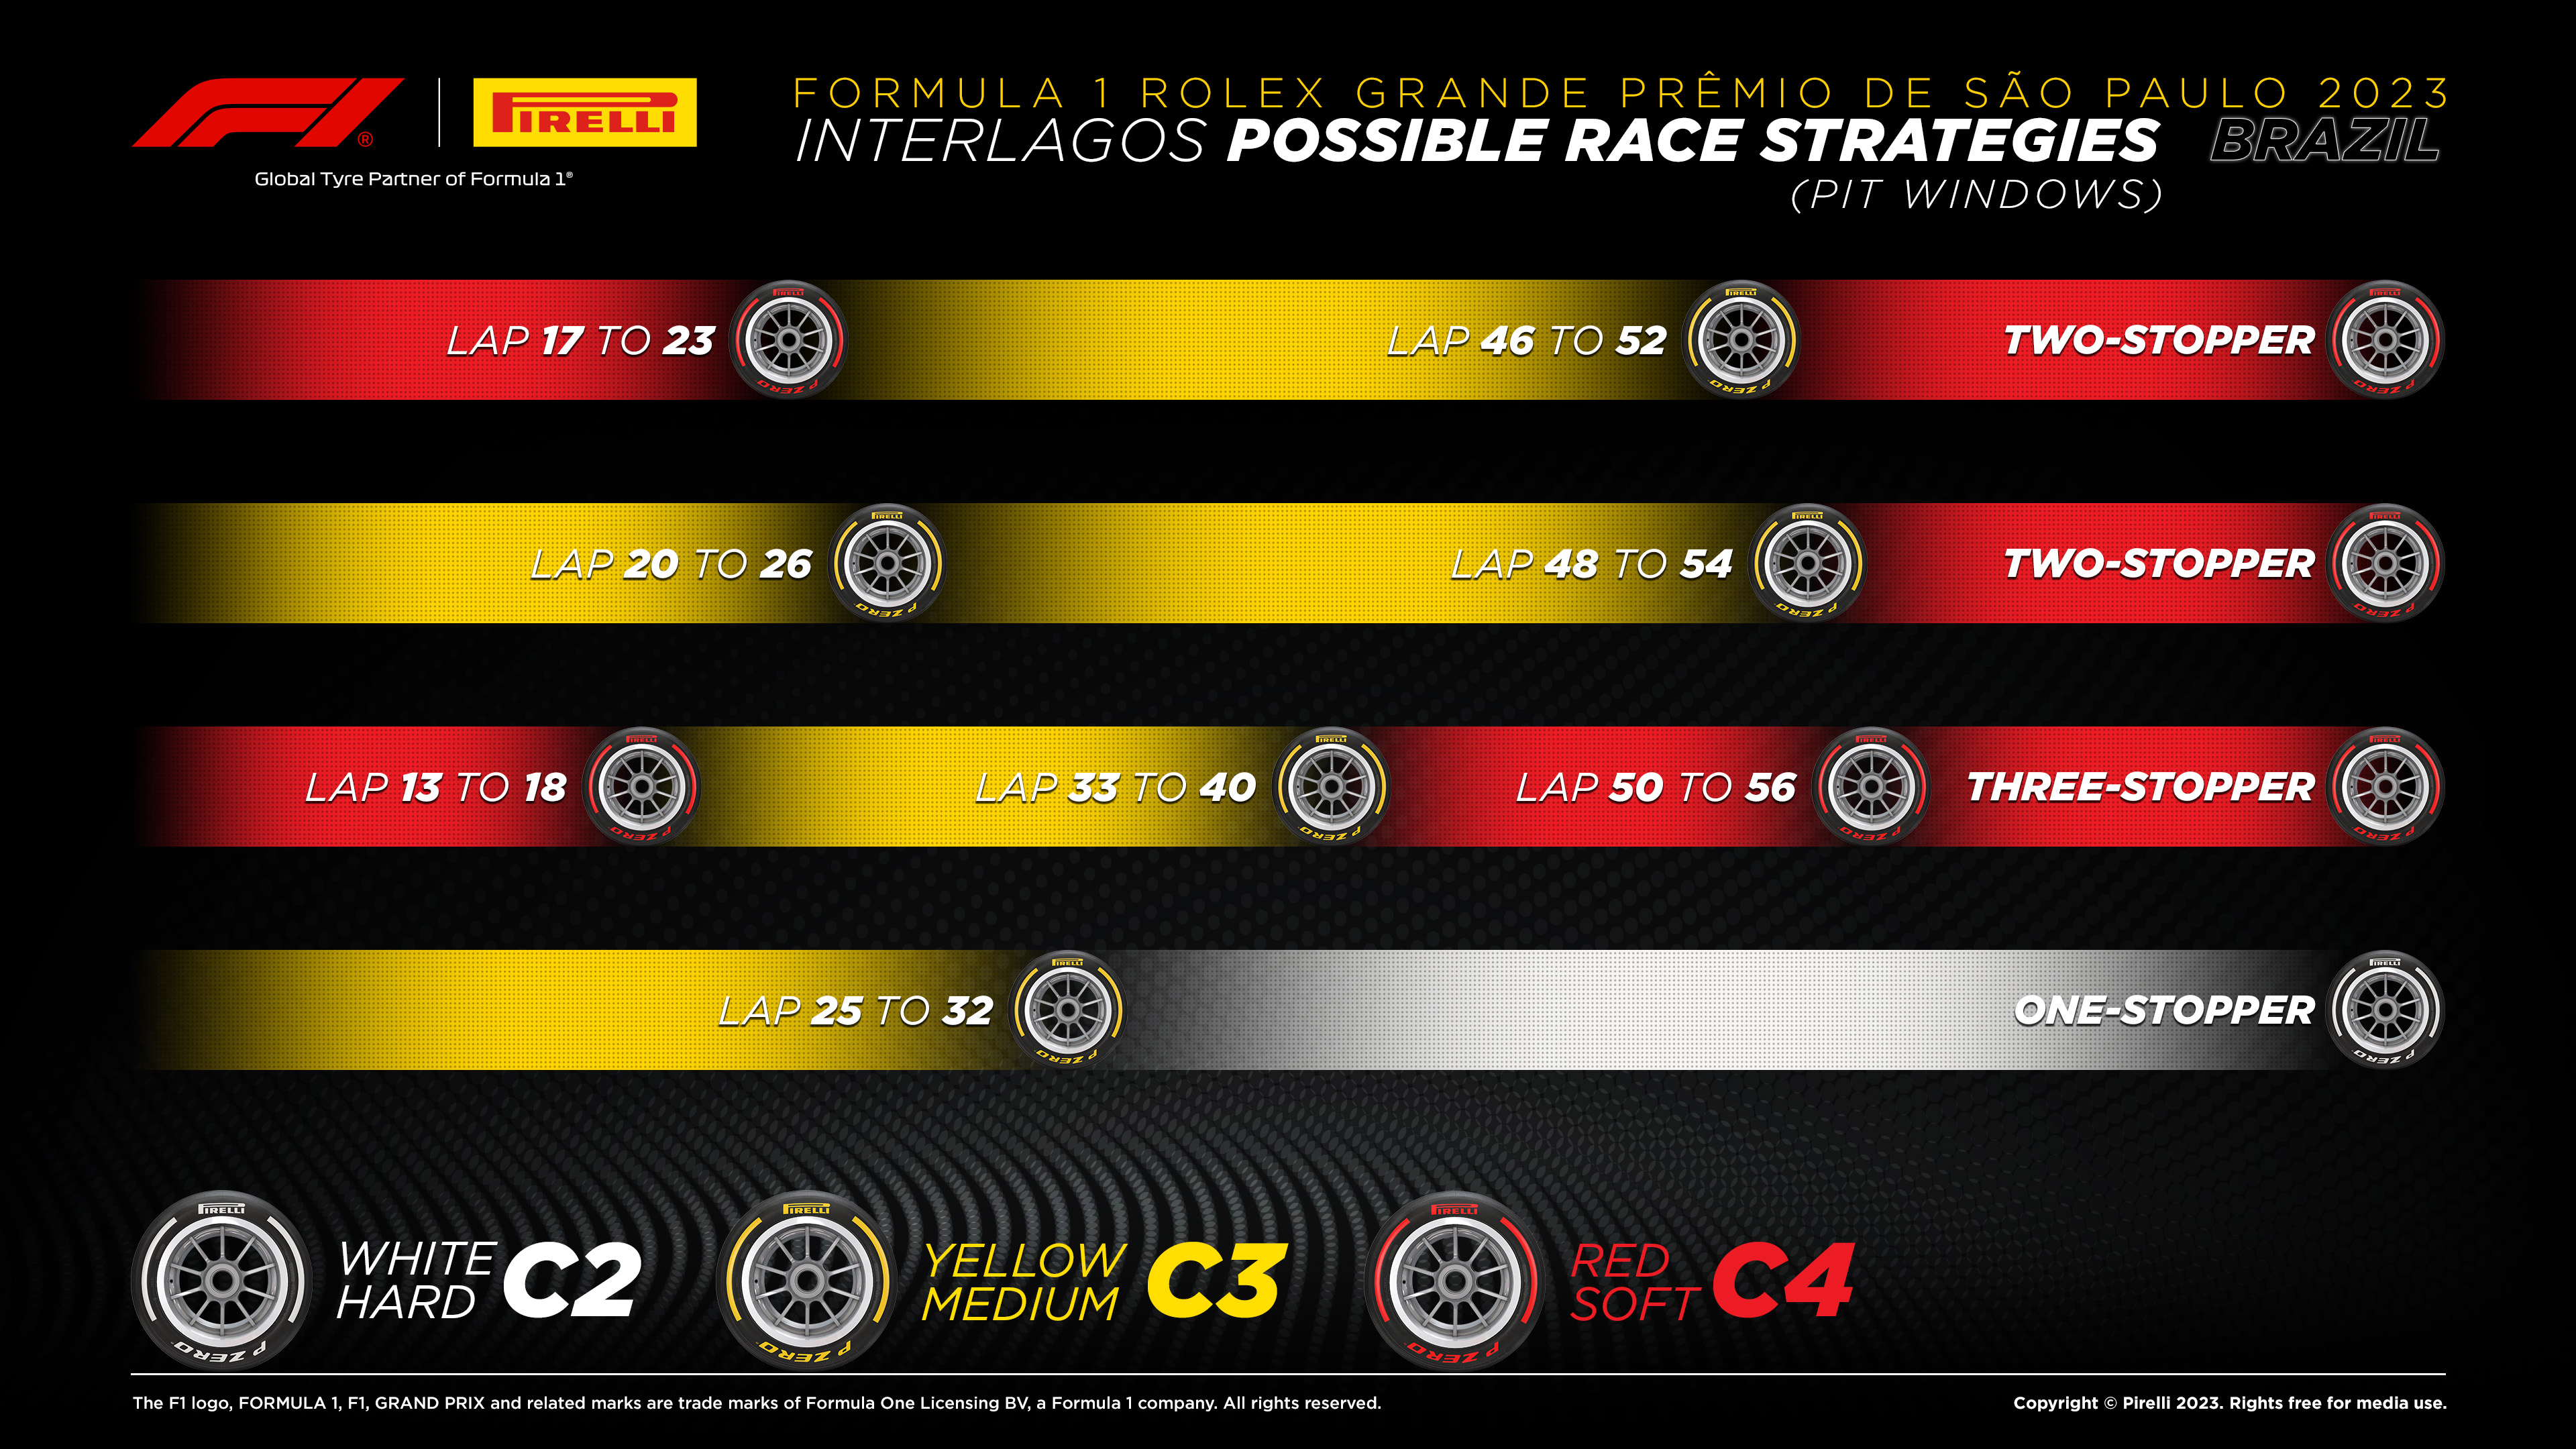 Possible race strategies for the Brazil GP. Two-stopper: Soft C4 until lap 17 to 23, then Medium C3 until lap 46 to 52, then Soft C4 until finish. Two-stopper: Medium C3 until lap 20 to 26, then Medium C3 until lap 48 to 54, then Soft C4 until finish. Three-stopper: Soft C4 until lap 13 to 18, then Medium C3 until lap 33 to 40, then Soft C4 until Lap 50 to 56, then Soft C4 until finish. One-stopper: Medium C3 until lap 25 to 32, then Hard C2 until finish.